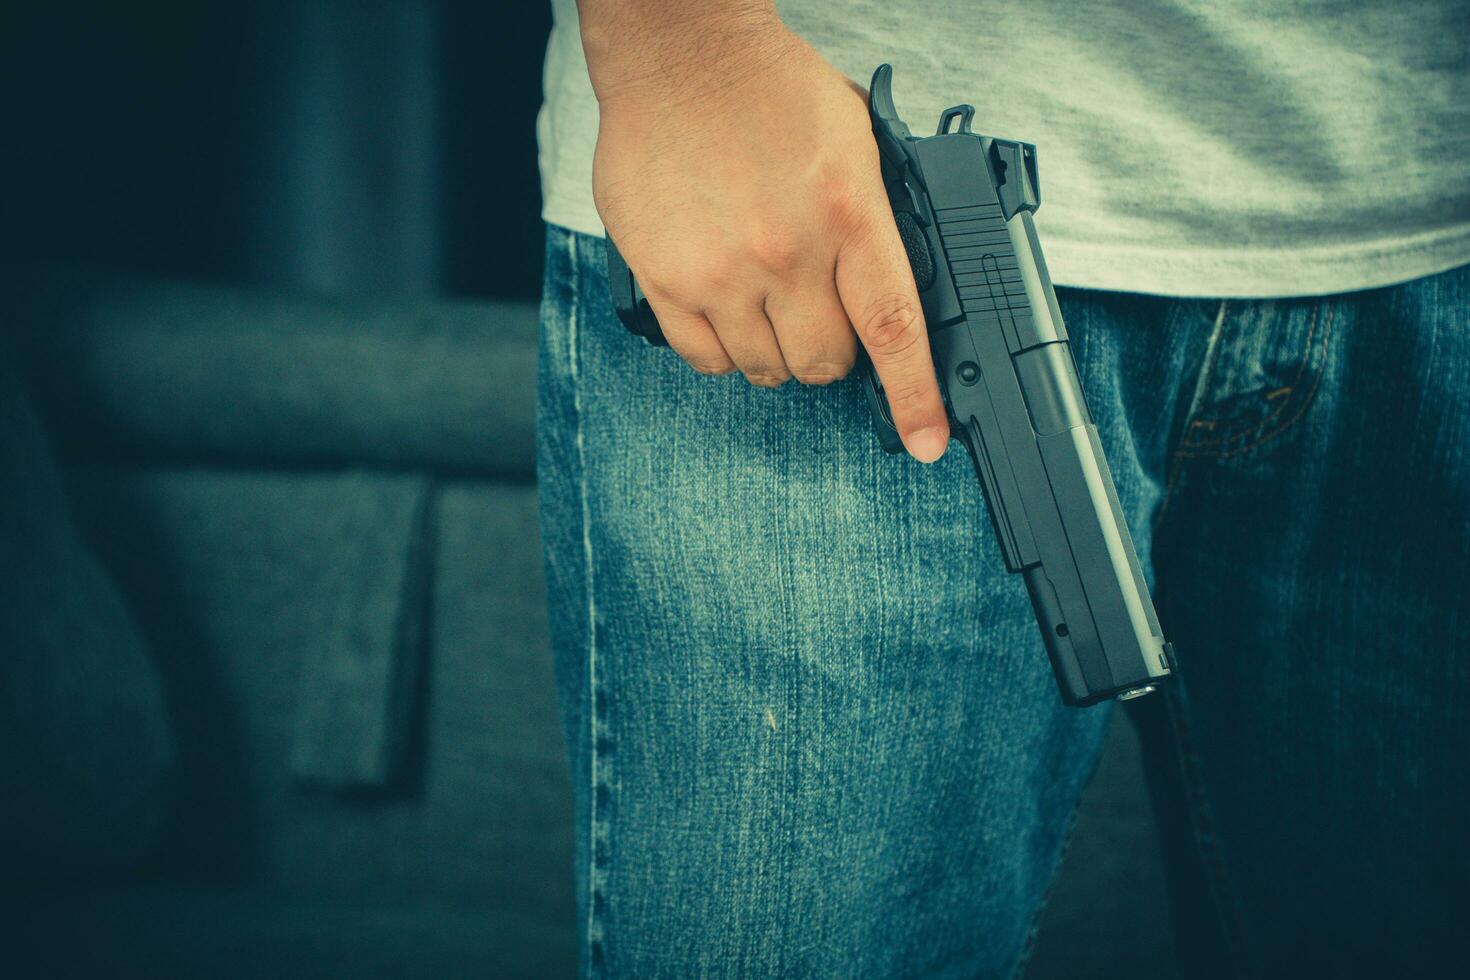 Men wearing t-shirts, jeans Standing holding a gun in the house photo